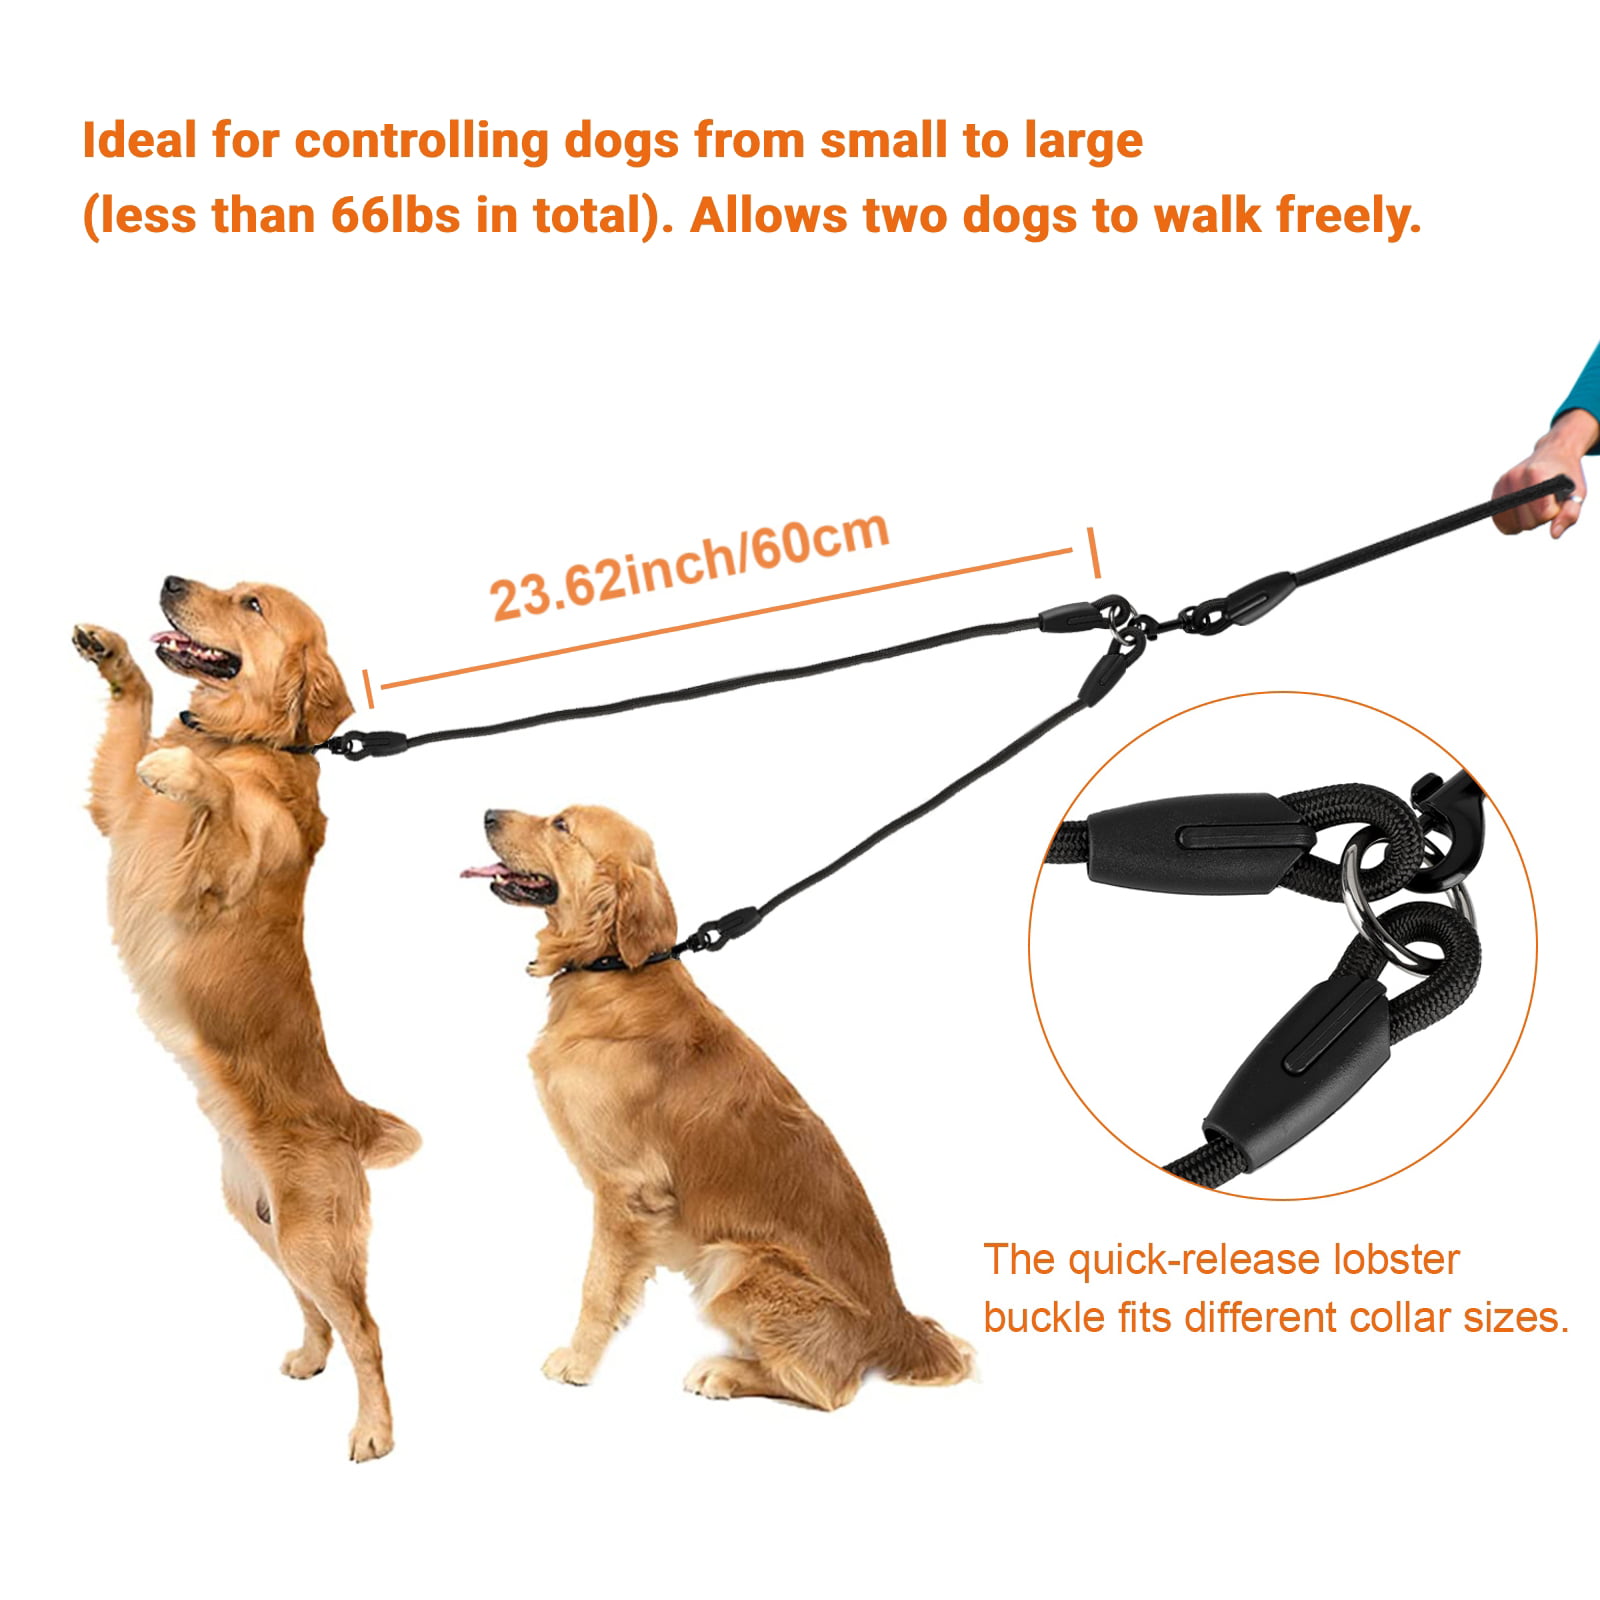 Double Dog Leash Cattech Dual Dog Leash 360 Swivel No Tangle Double Dog Walking Training Leash,Comfortable Reflective Bungee Double Leash for Dogs 